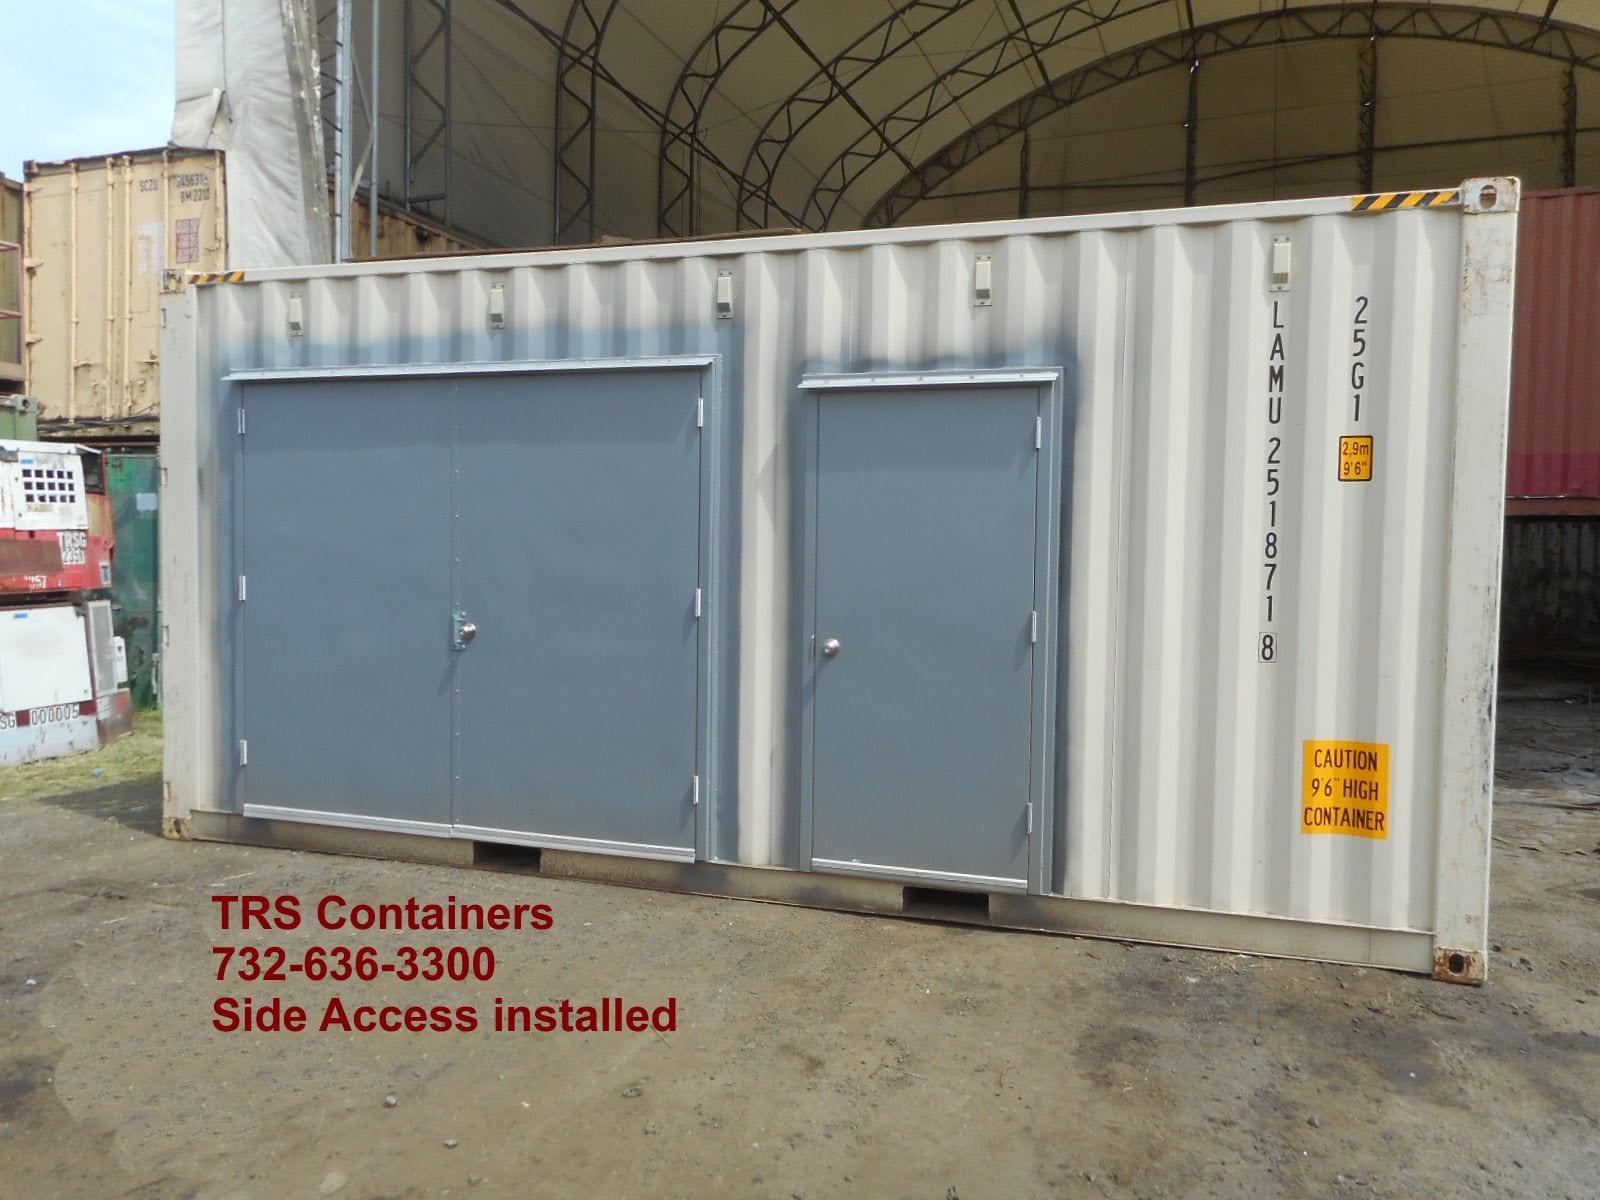 Need easy access to a steel shipping container? TRS installs personnel doors in new highcubes